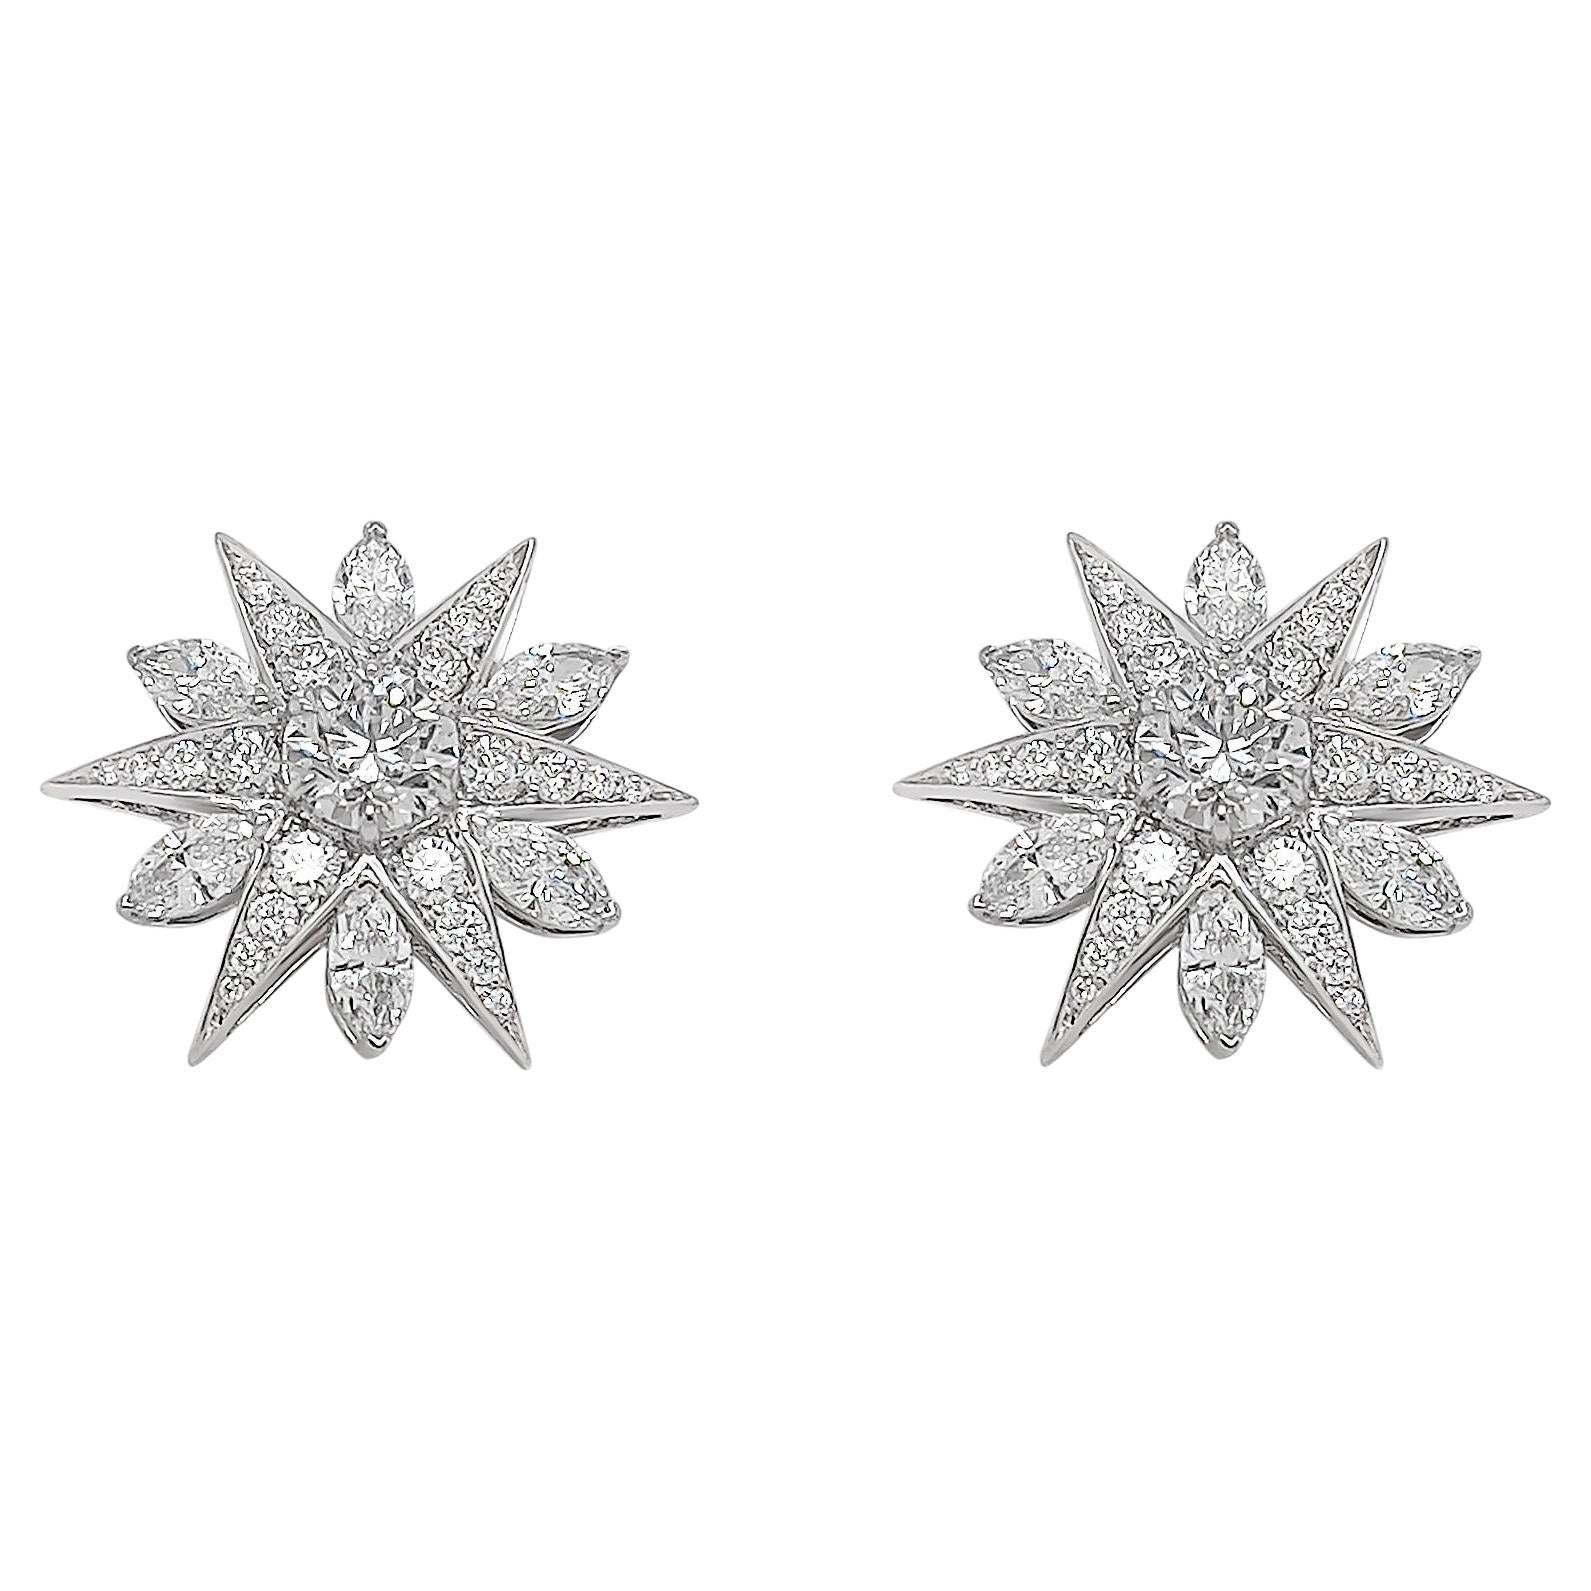 2.995 Carats Diamond Cluster Earrings in 18k White Gold  For Sale